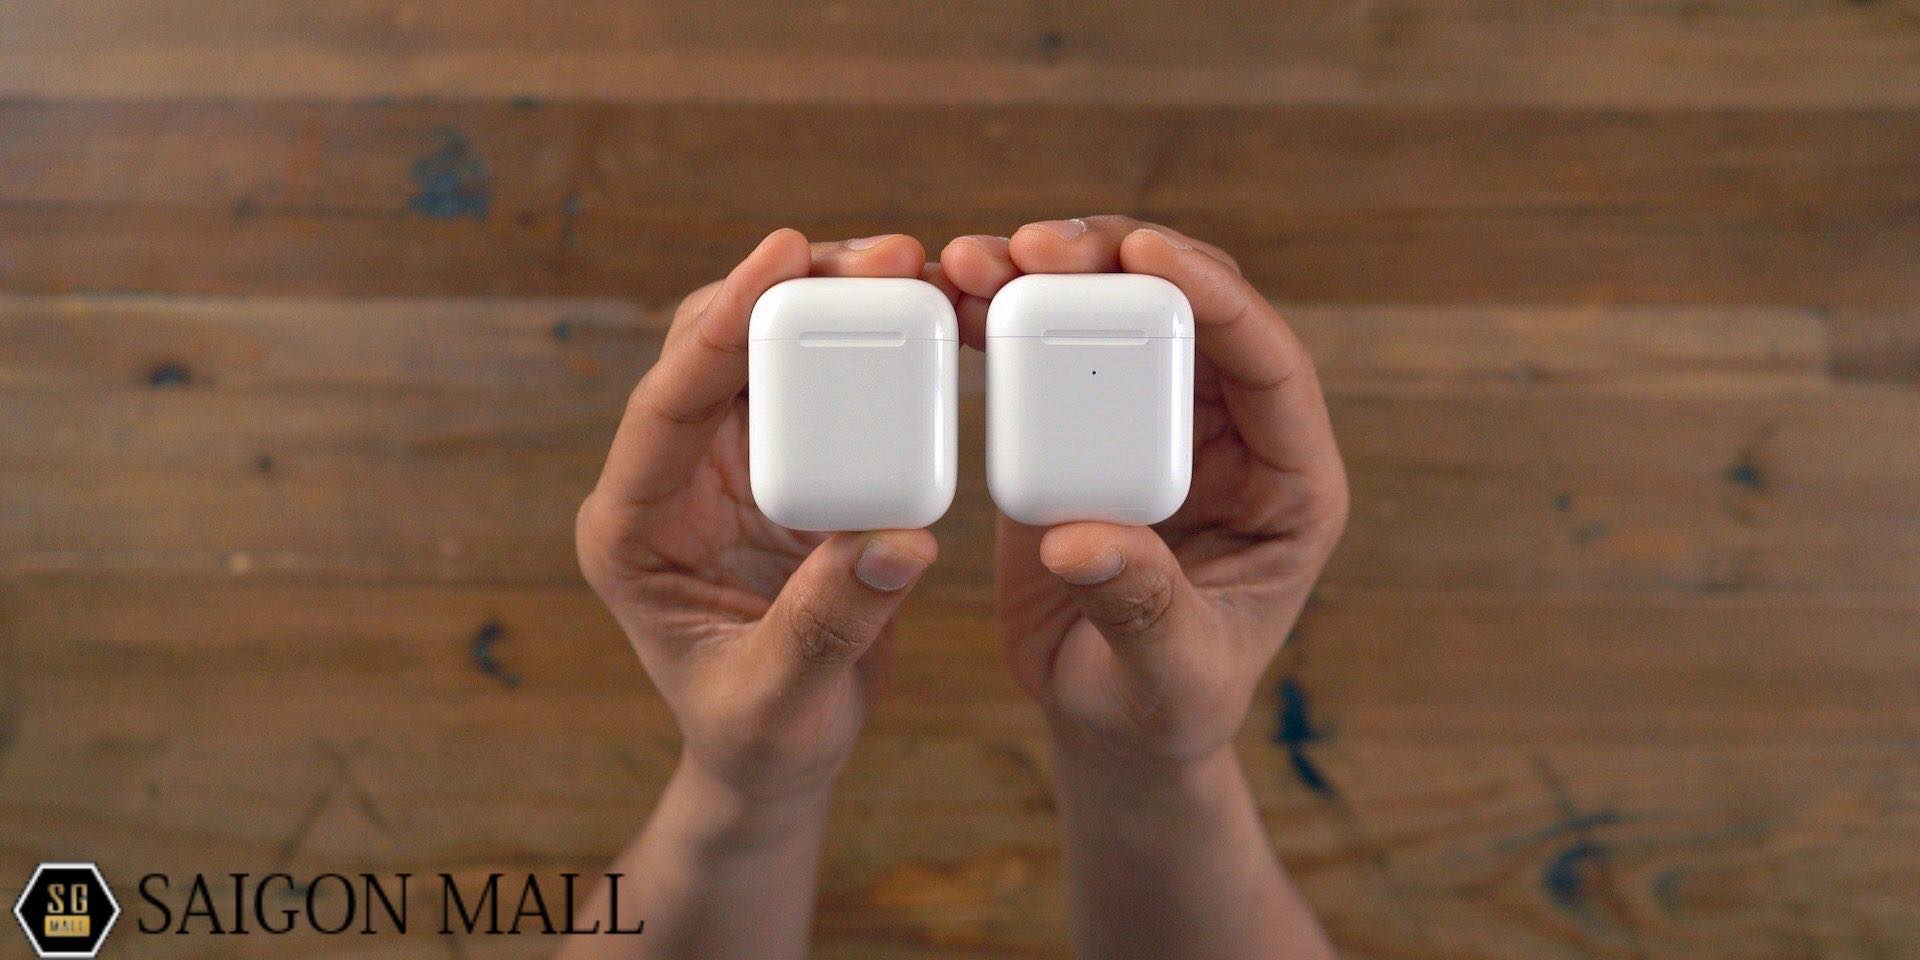 Airpods 1 với Airpods 2